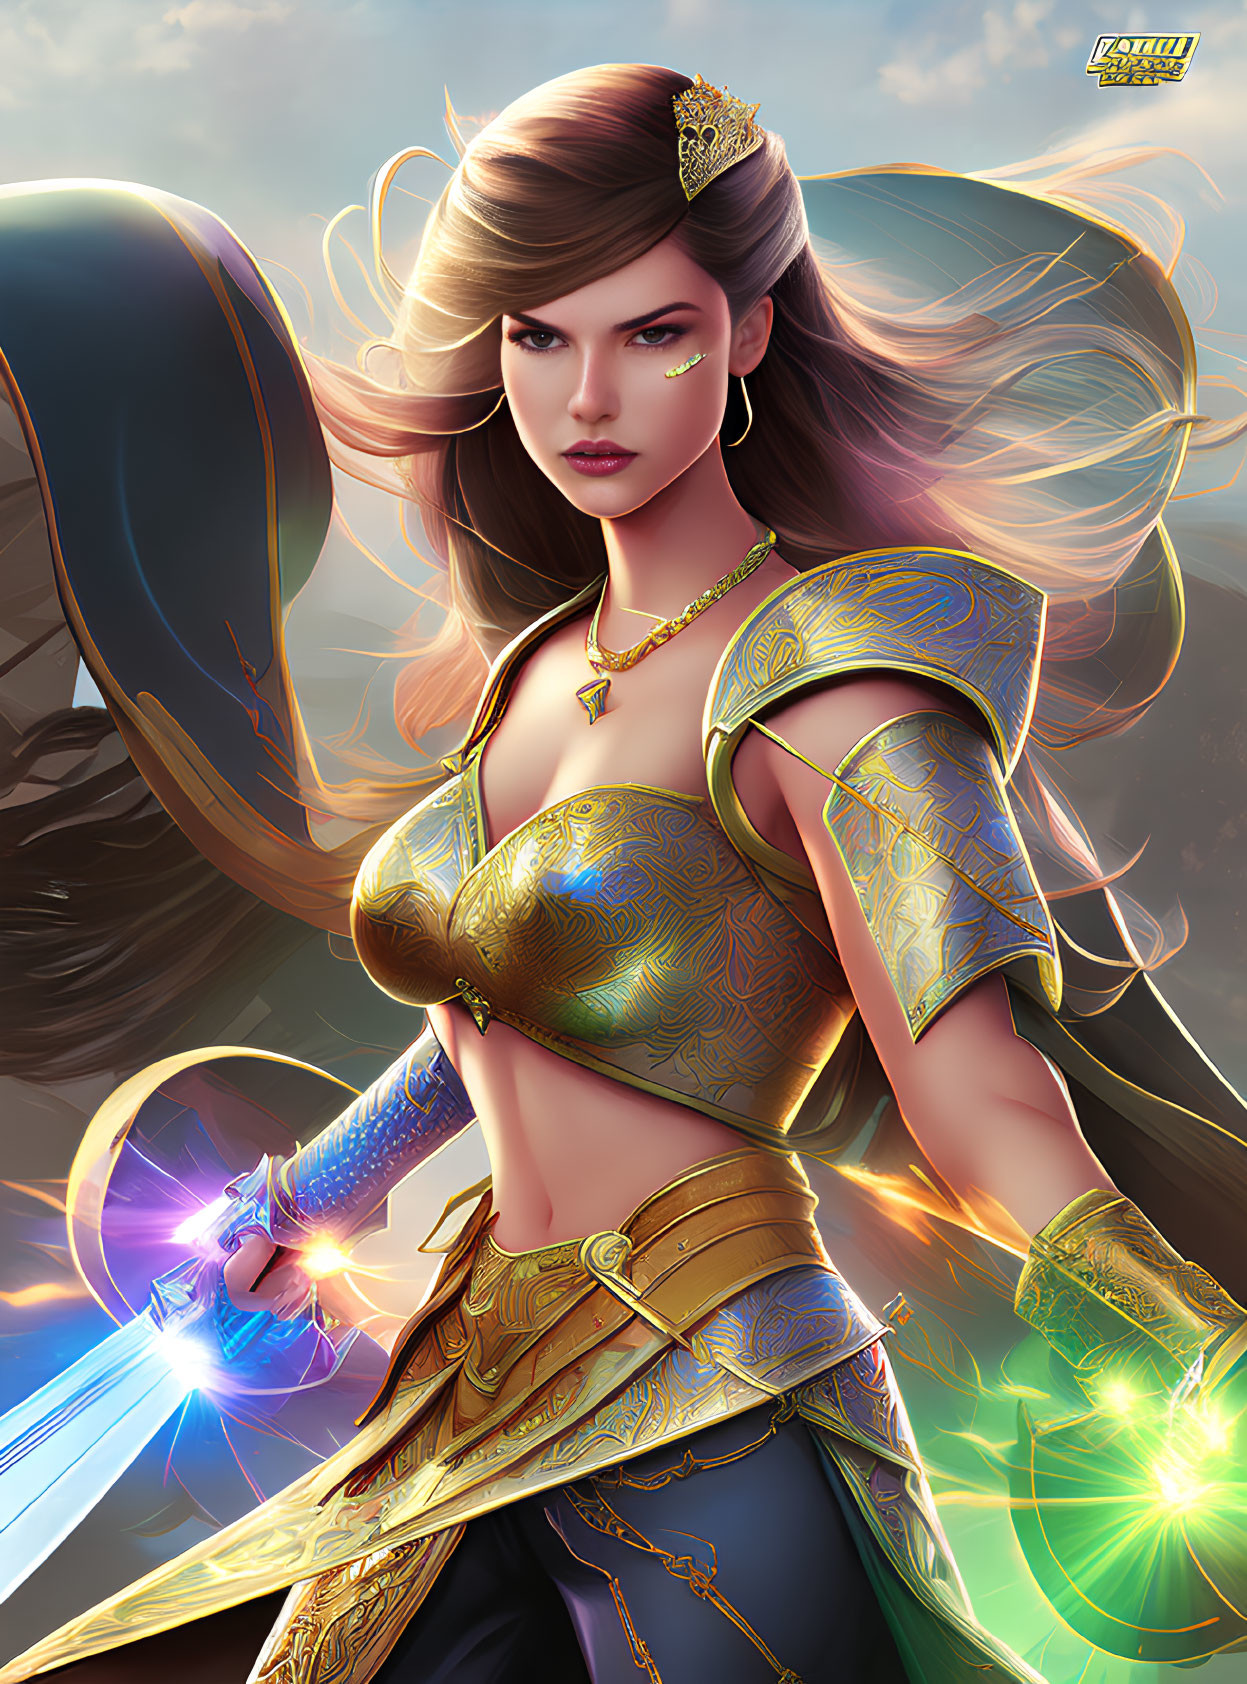 Fantasy warrior woman in golden armor with glowing sword against dramatic sky.